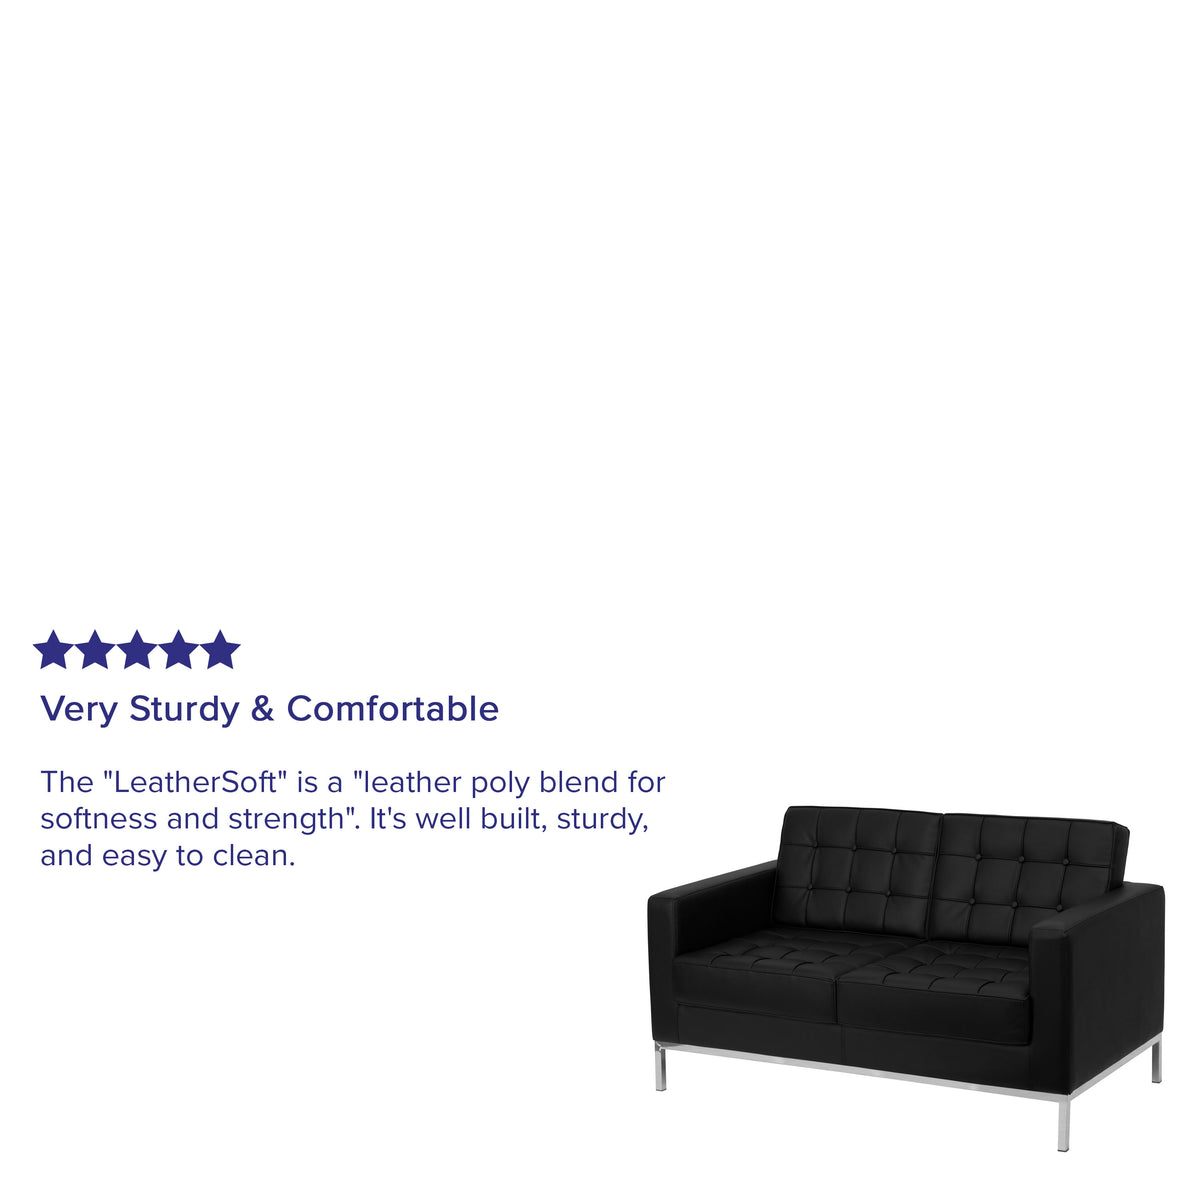 Black |#| Button Tufted Black LeatherSoft Loveseat w/Integrated Stainless Steel Frame